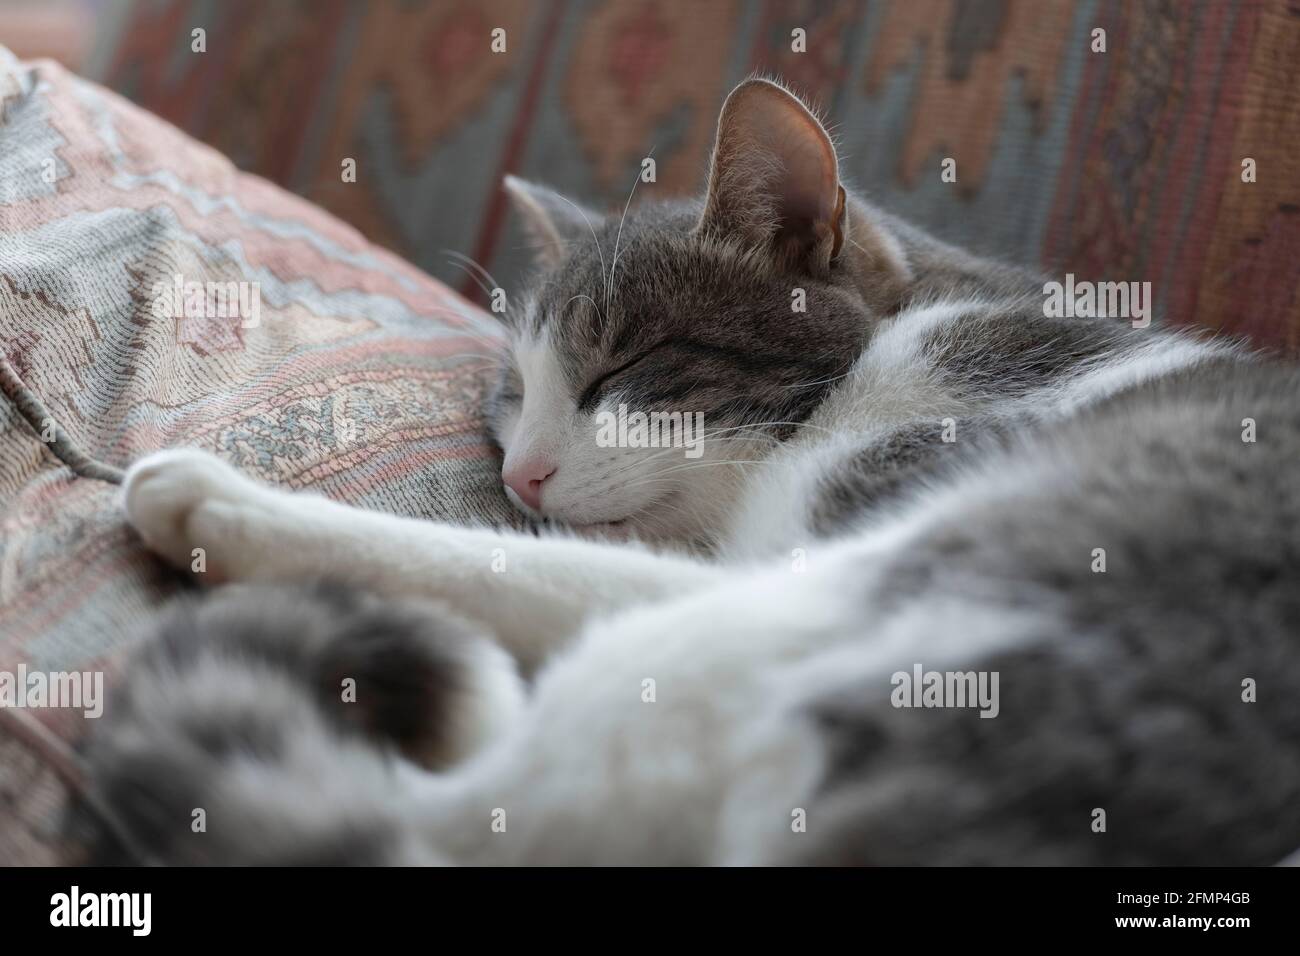 A Grey and White Pet Cat Asleep on a Sofa Cushion Stock Photo